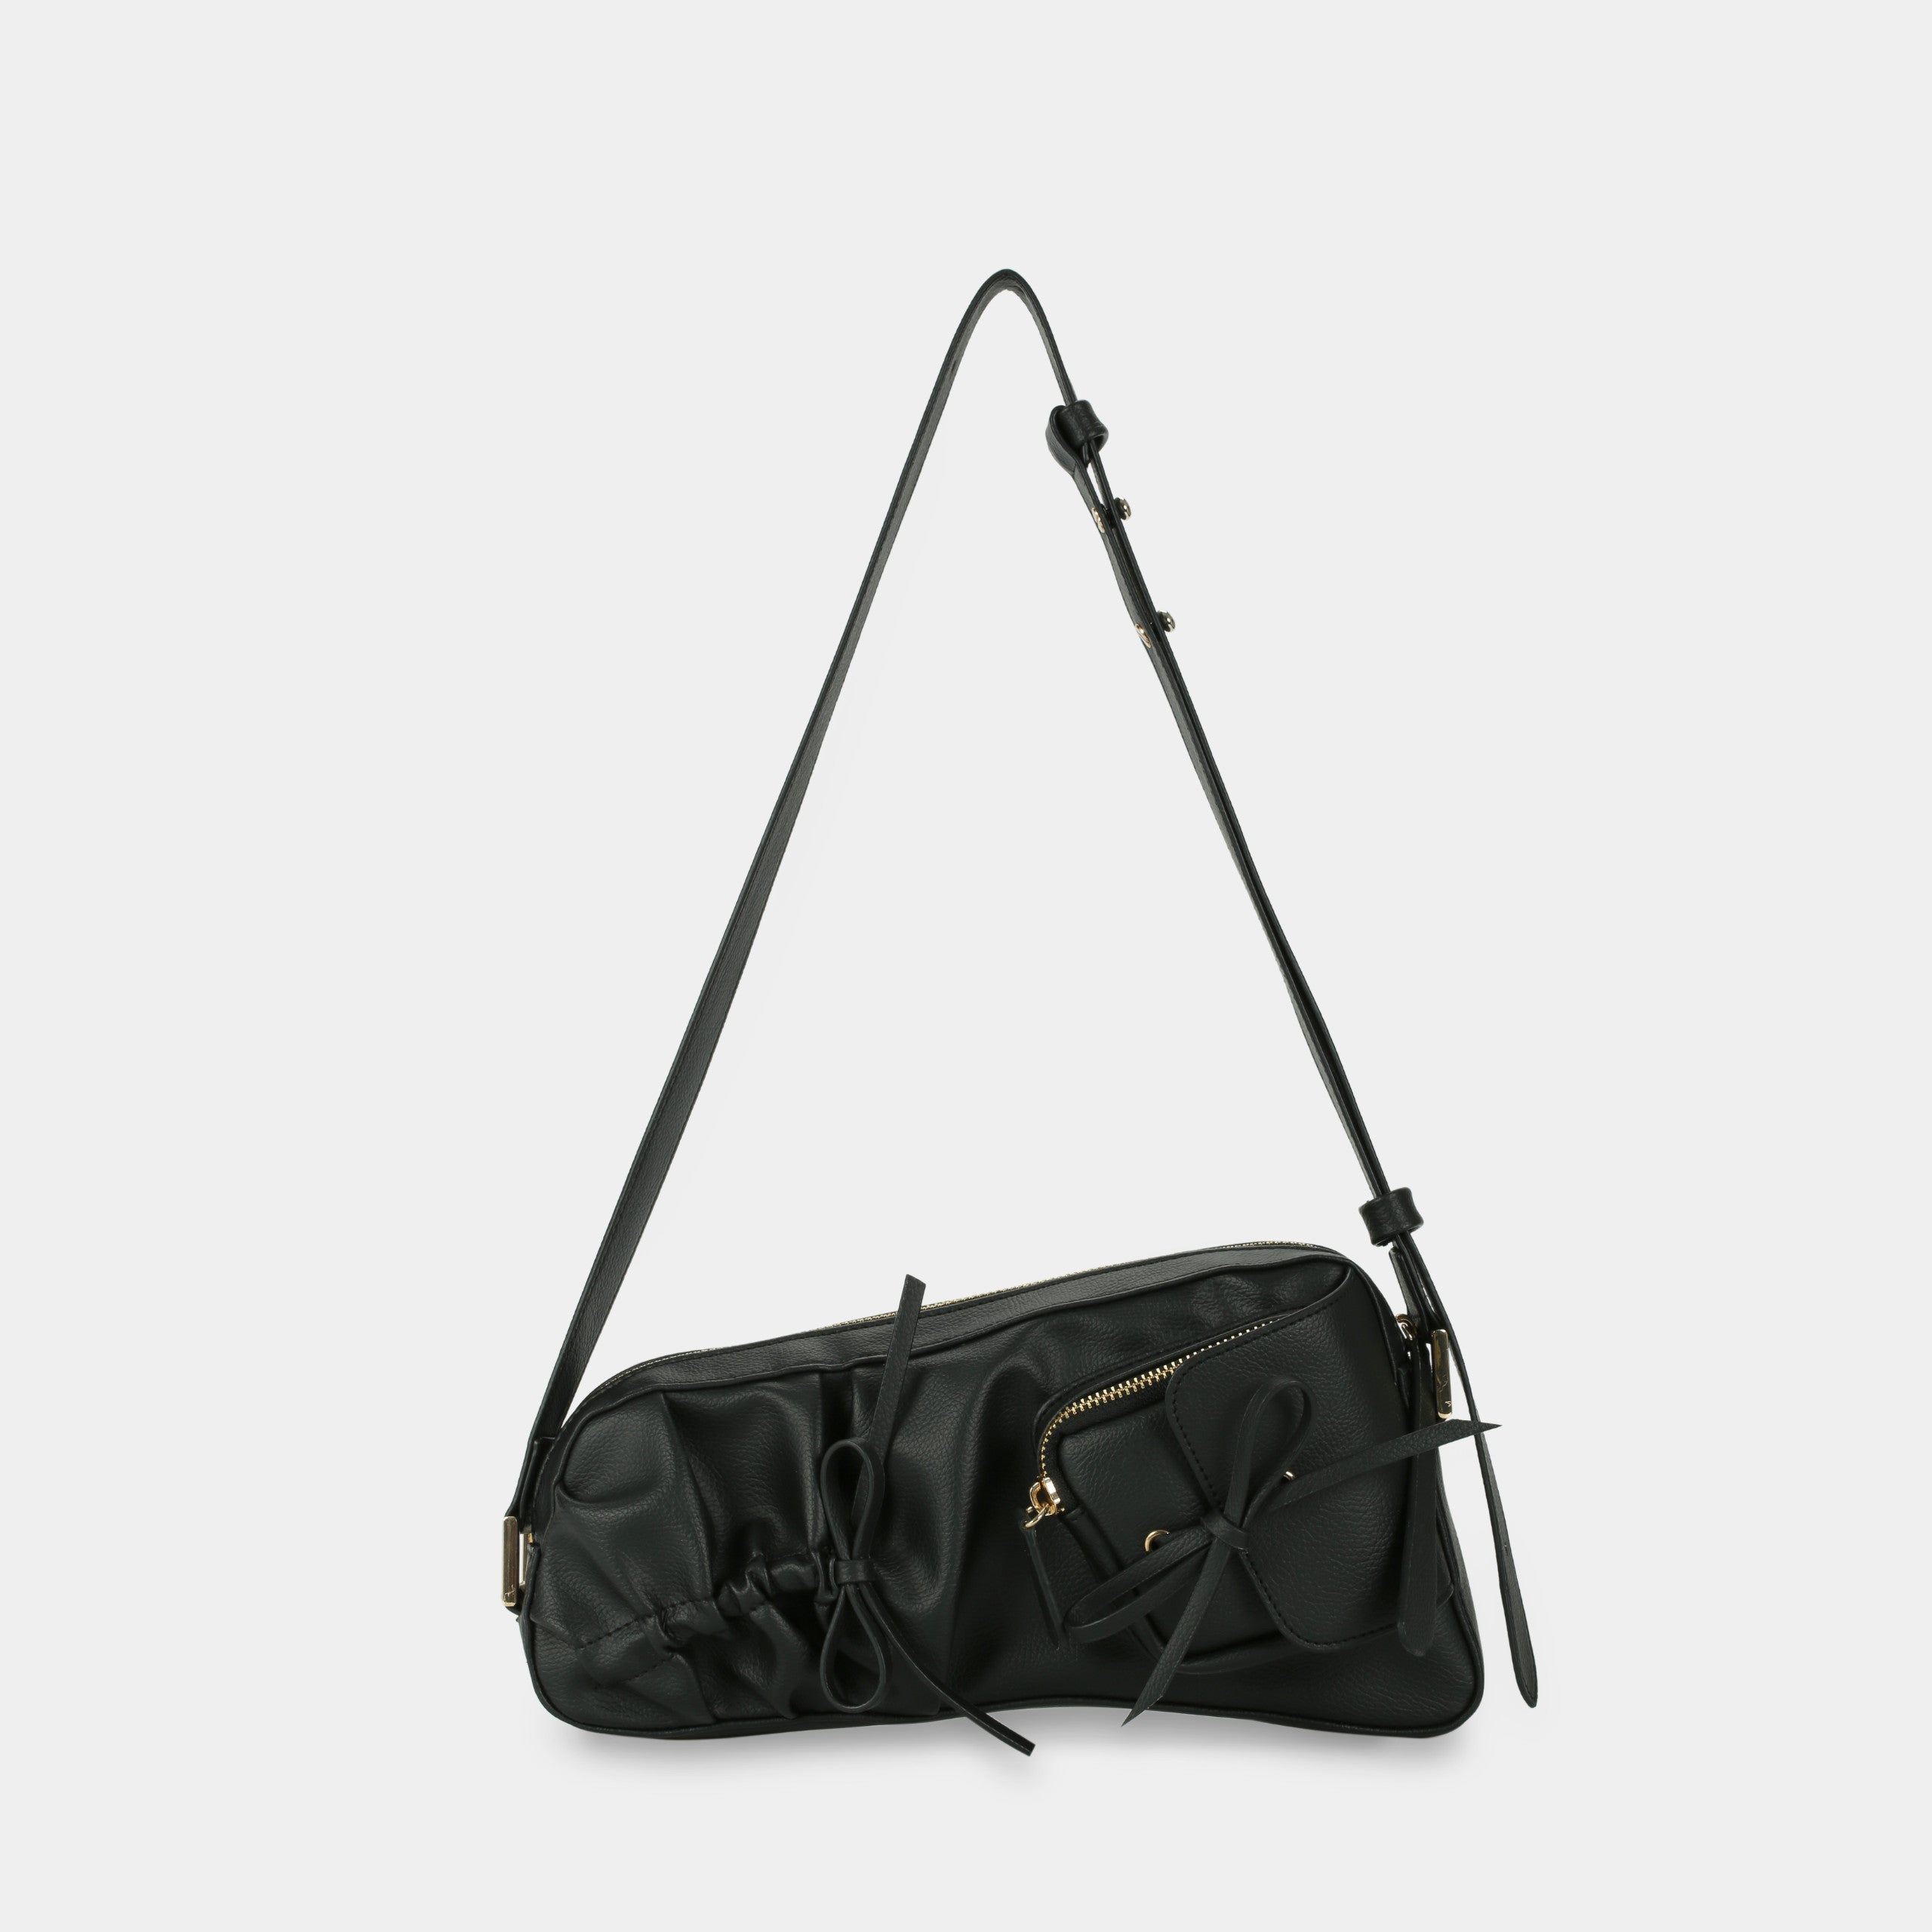 Freely Bag with Bow in Black